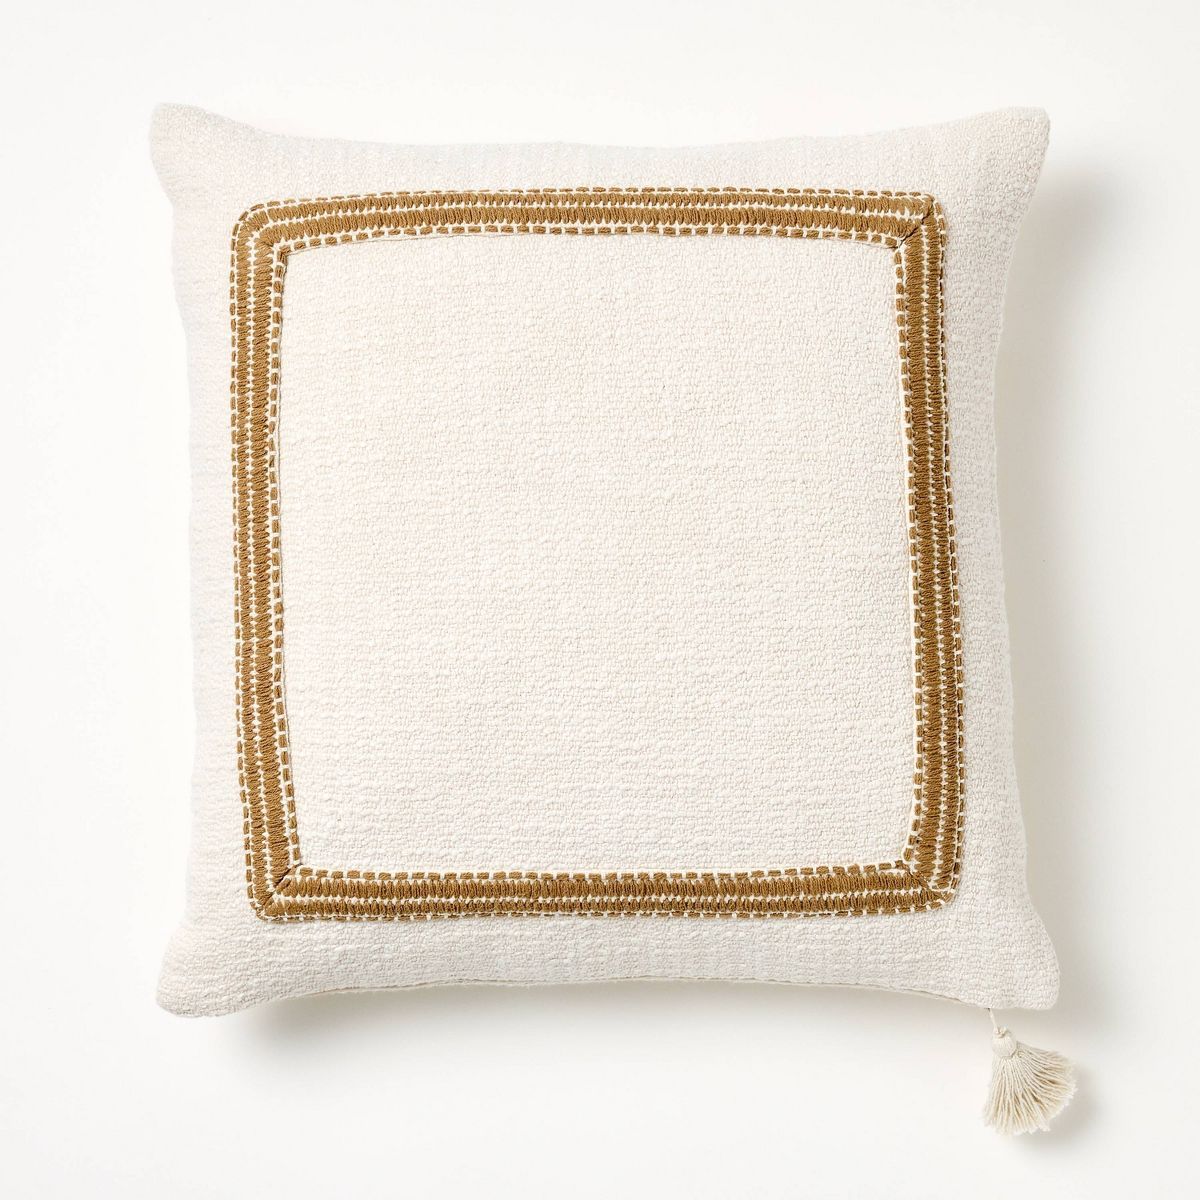 Embroidered Frame Square Throw Pillow Cream/Dark Tan - Threshold™ designed with Studio McGee | Target